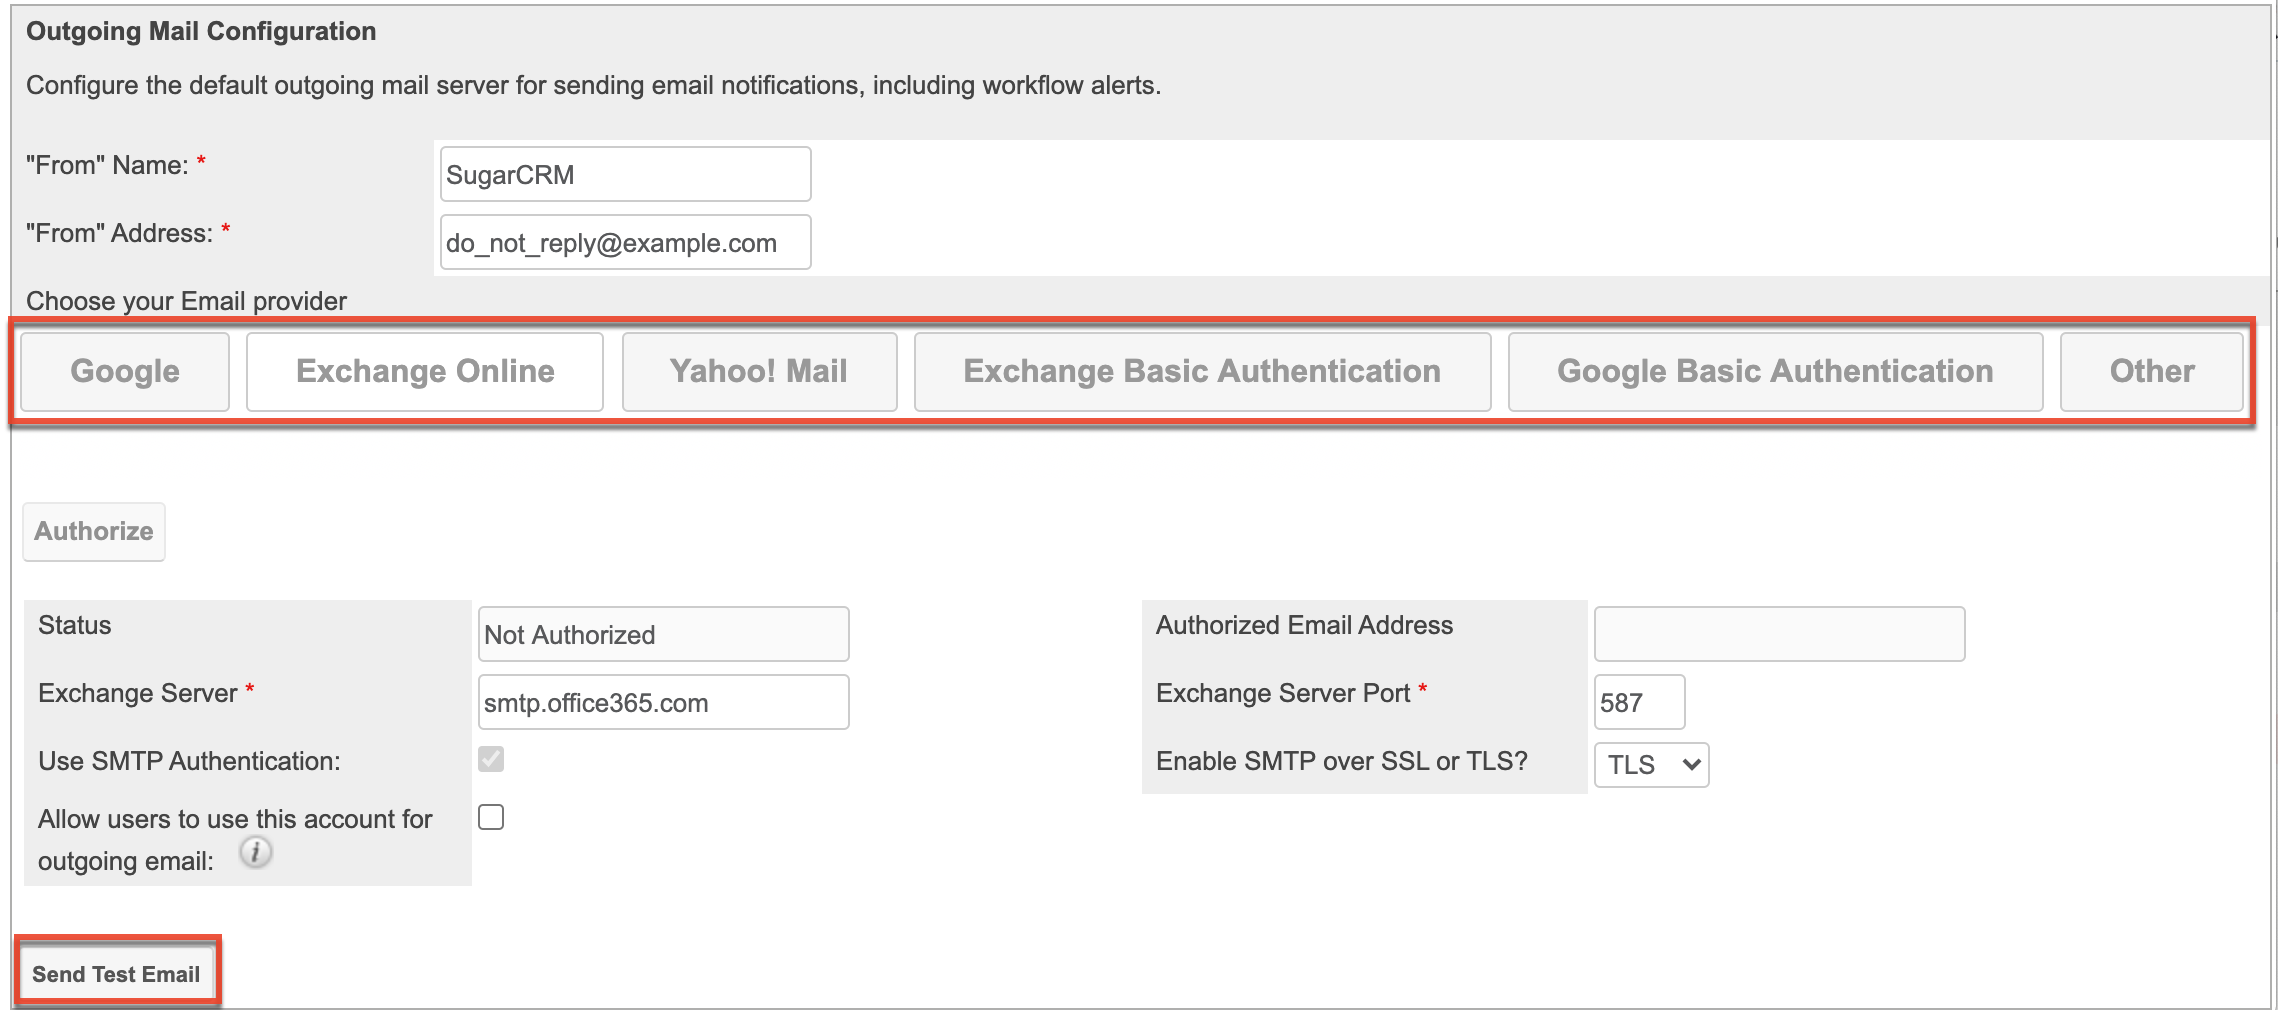 Email SystemEmailSettings OutgoingMailConfiguration1